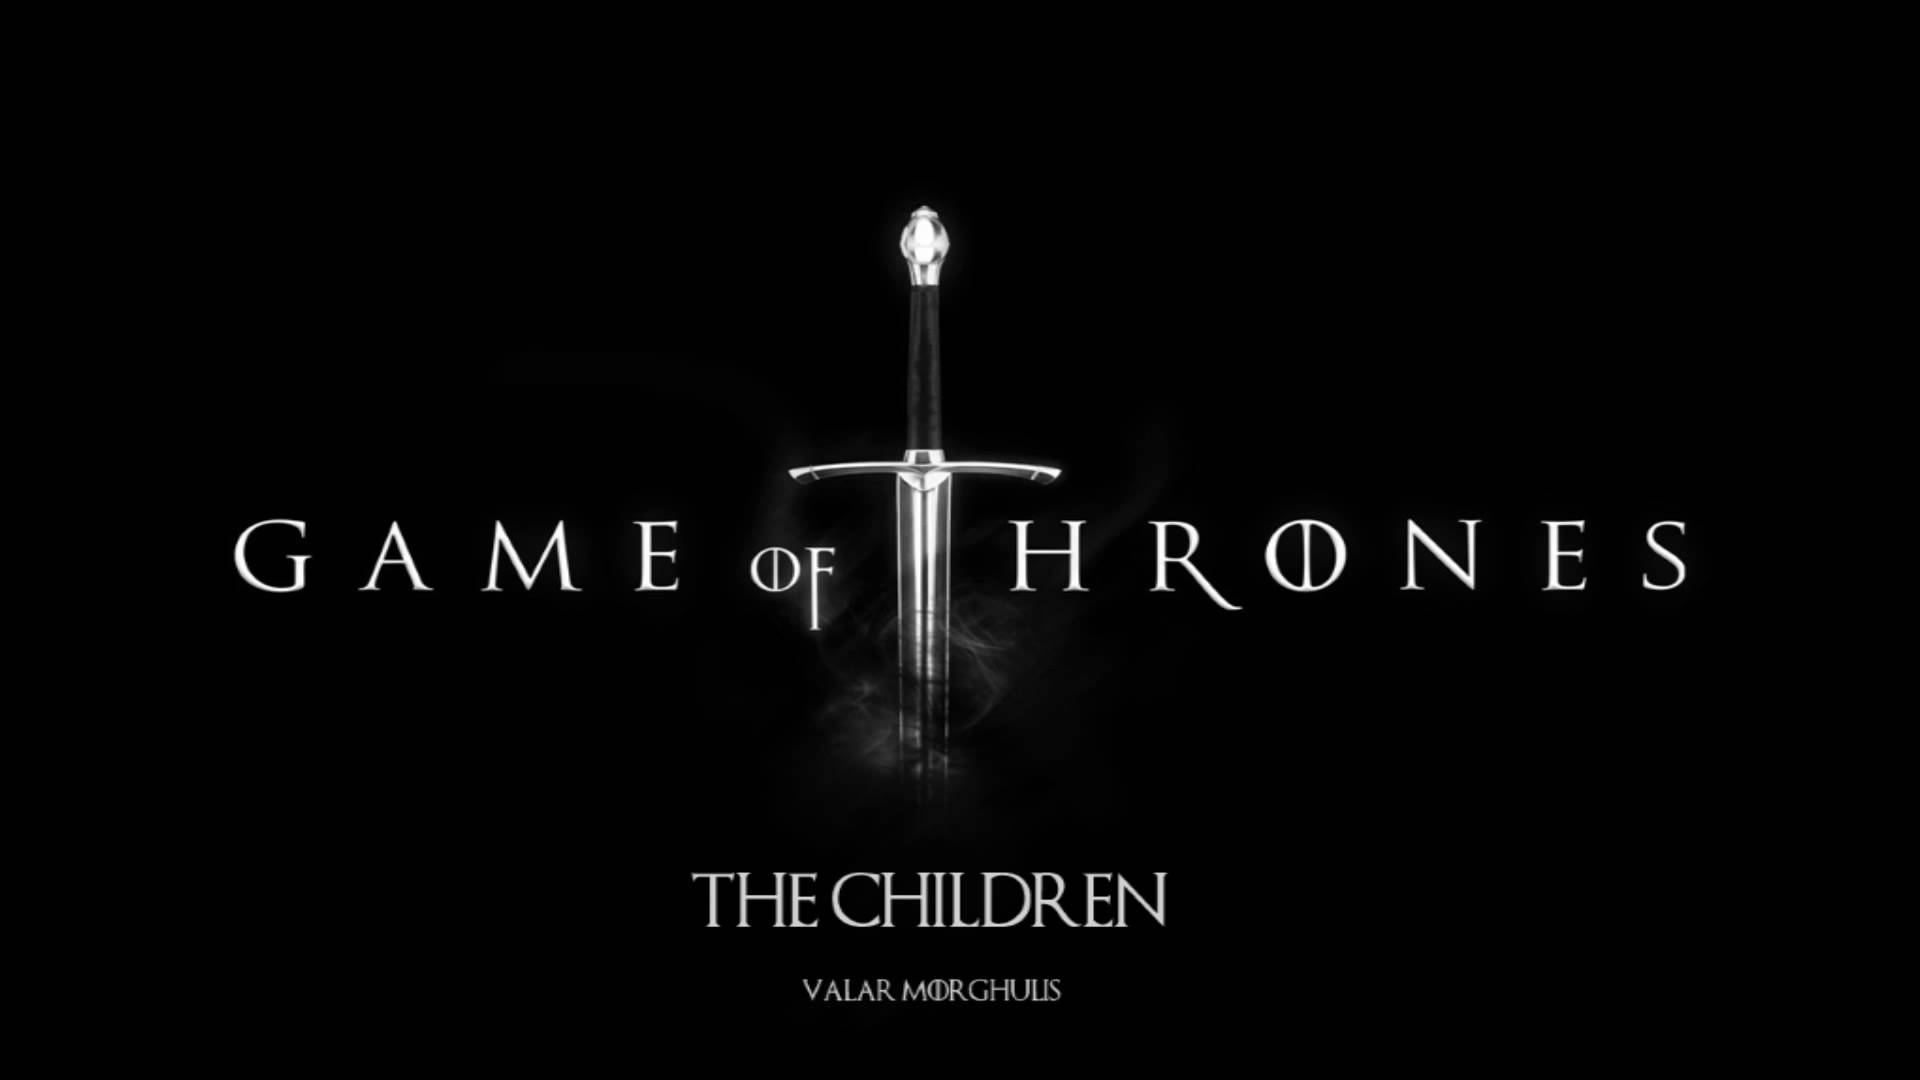 Game Φf Thrones. The Children (Valar Morghulis)